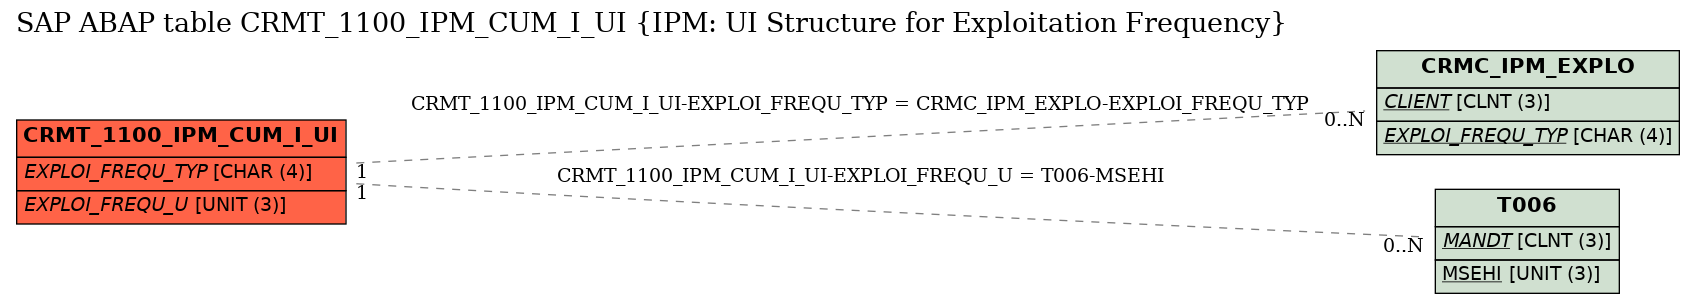 E-R Diagram for table CRMT_1100_IPM_CUM_I_UI (IPM: UI Structure for Exploitation Frequency)